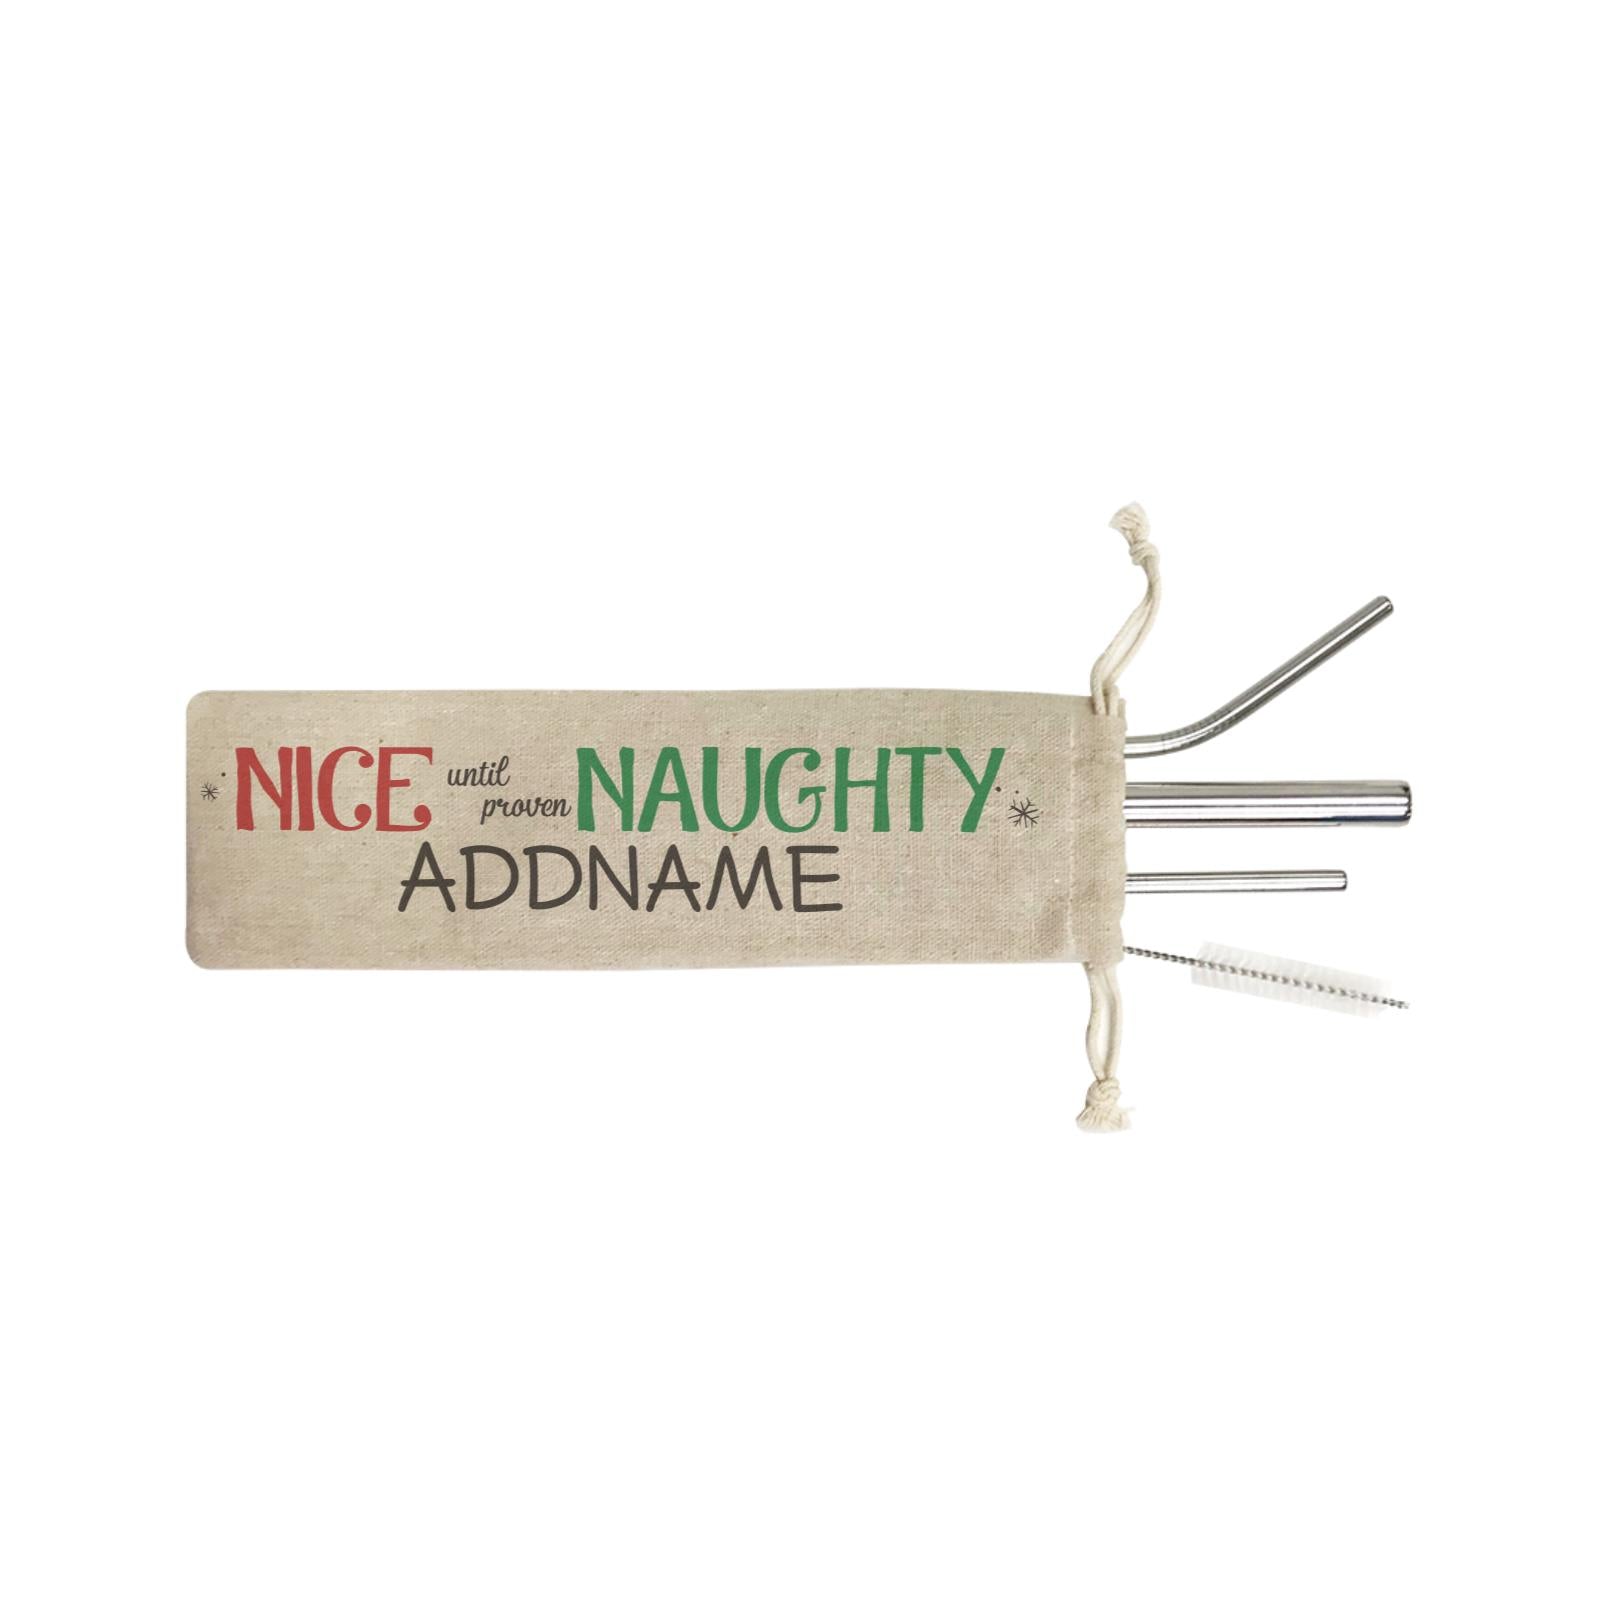 Xmas Nice until Proven Naughty SB 4-in-1 Stainless Steel Straw Set In a Satchel